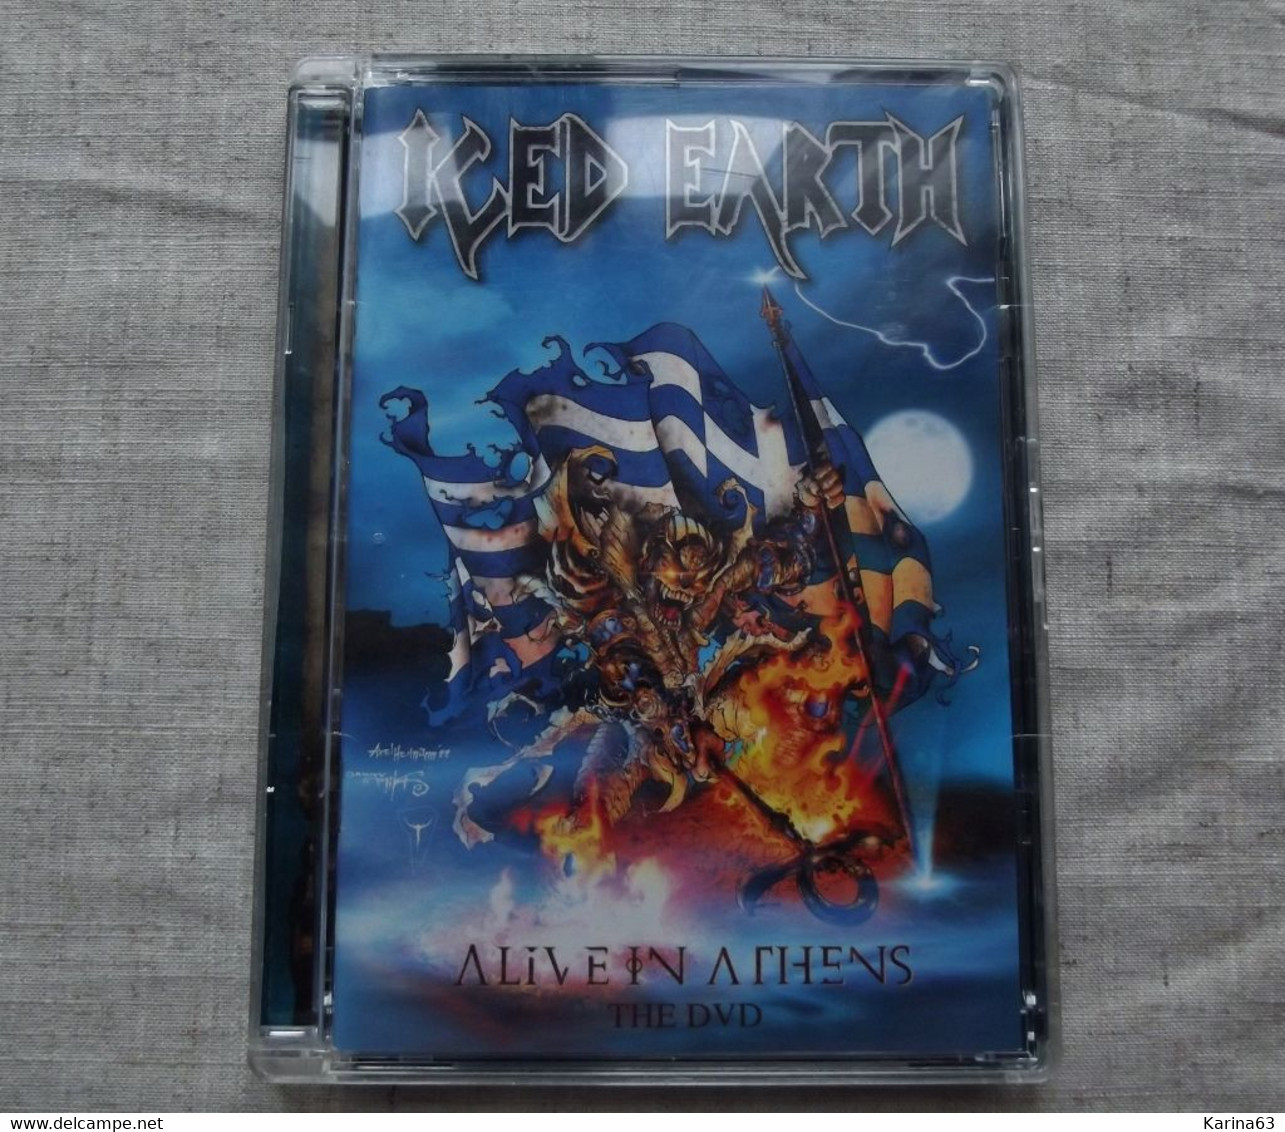 Iced Earth - Alive In Athens - 2007 - DVD Musicales